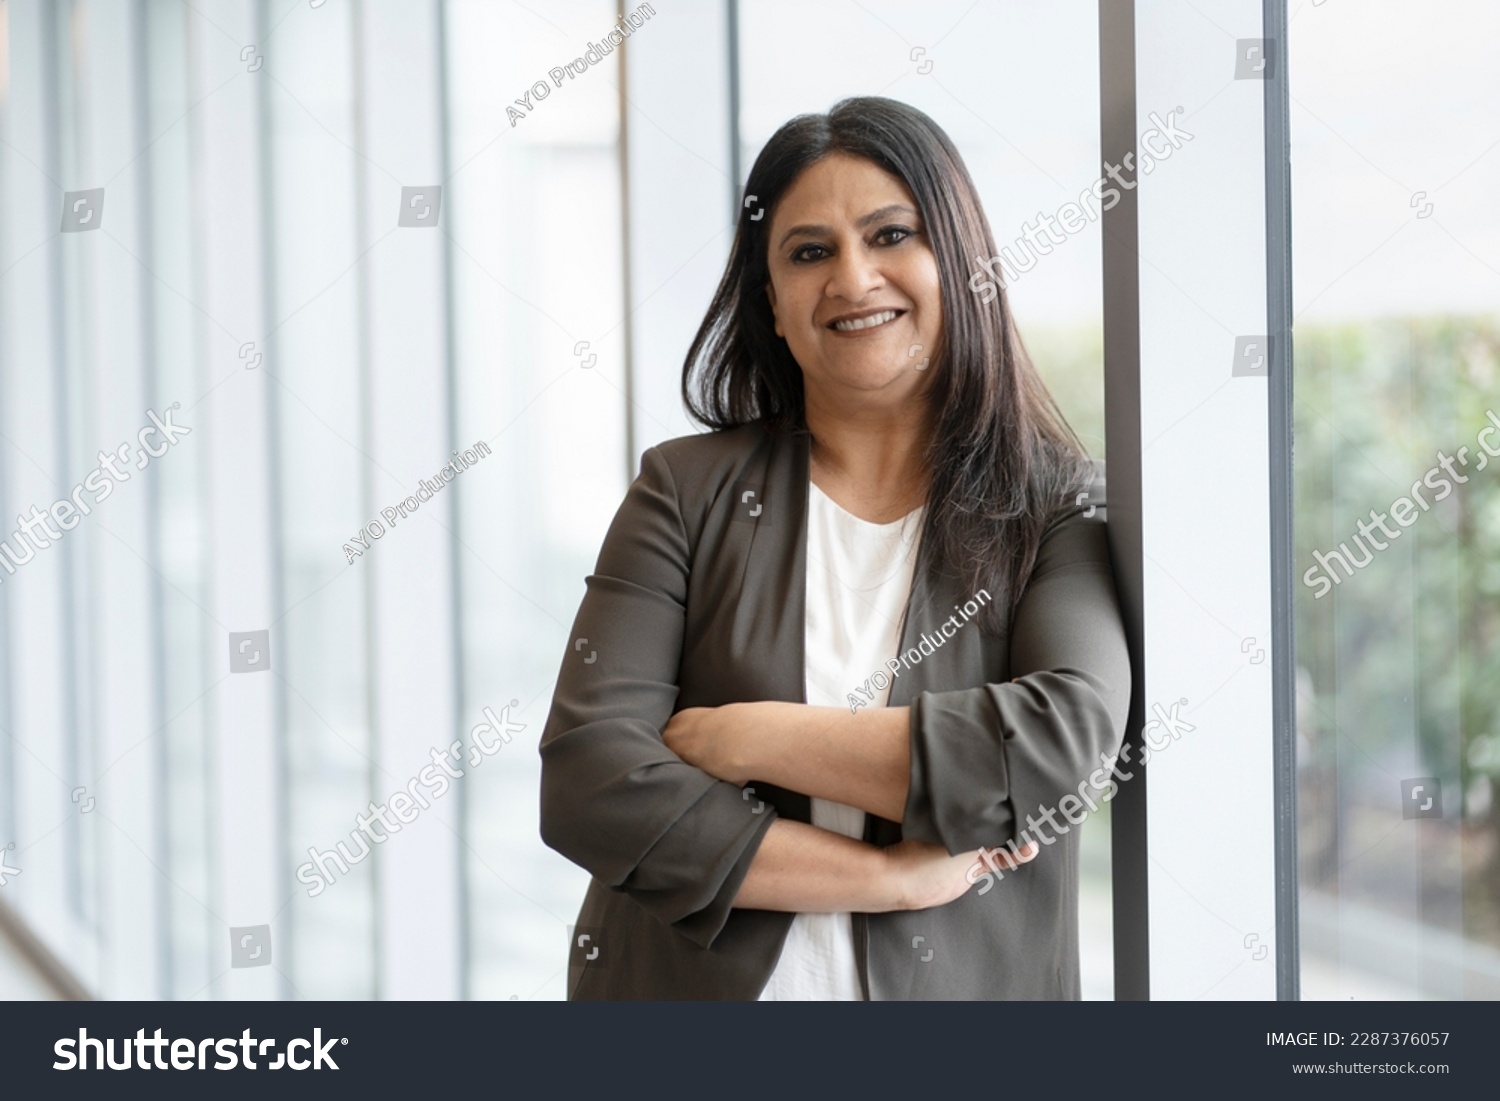 Confident smiling mature Indian businesswoman with arm crossed standing in modern office. Portrait of happy asian worker wearing stylish suit looking at camera indoors. Successful business concept  #2287376057